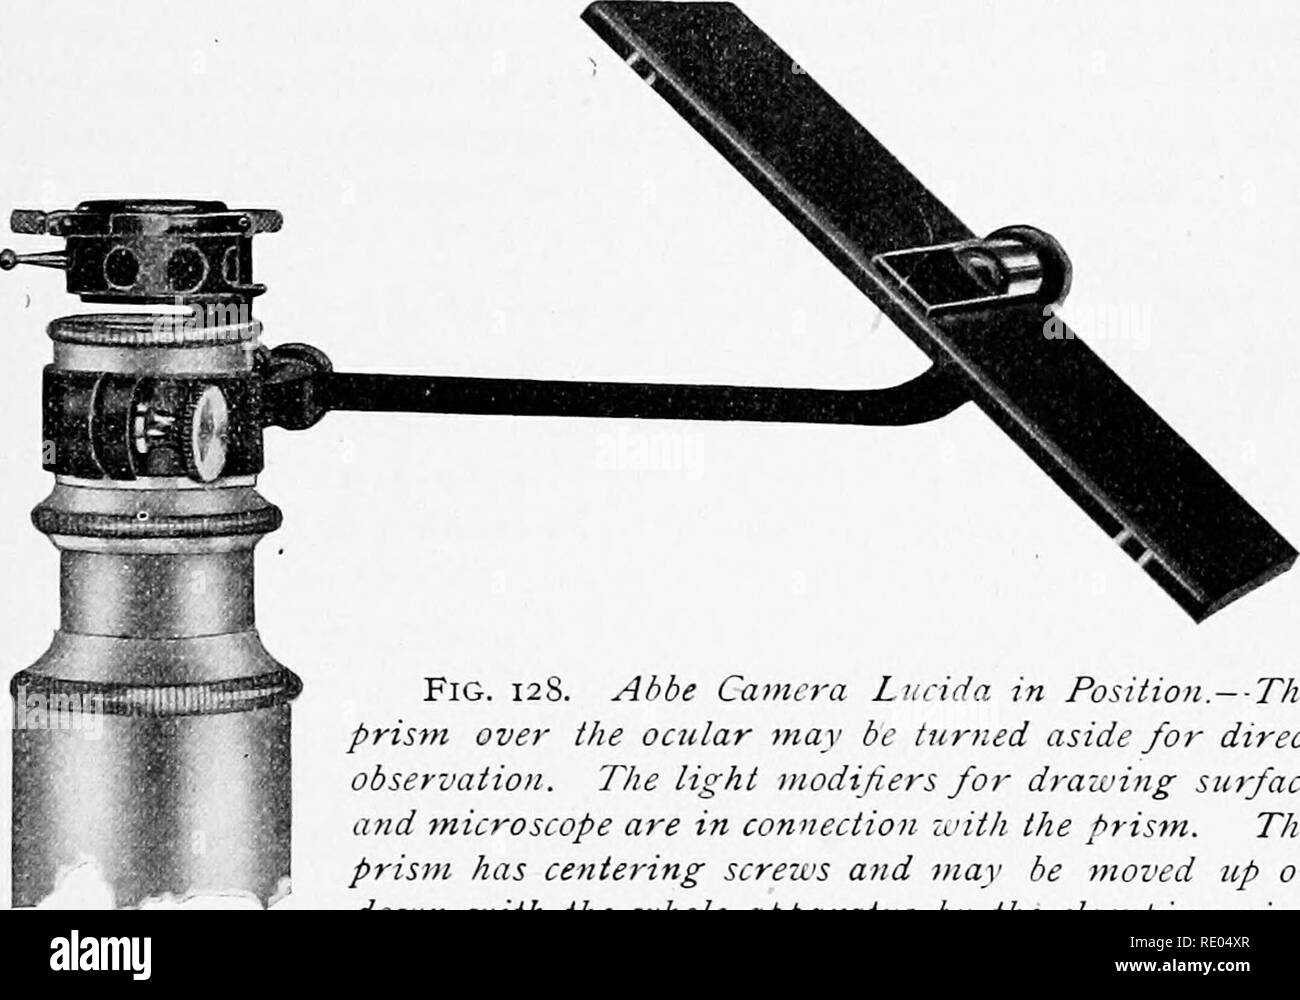 . The microscope : an introduction to microscopic methods and to histology. Microscopes. CH. ir DRAWING WITH THE MICROSCOPE 145 § 203. Arrangement of the Camera Lucida Prism.—In placing this camera lucida over the ocular for drawing or the deter- mination of magnification, the center of the hole in the silvered surface is placed in the optic axis of the microscope. This is done by properly arranging the centering screws that clamp the camera to the microscope tube or ocular. The perforation in the silvered surface must also be at the level of the eye-point. In other words the prism must be so Stock Photo